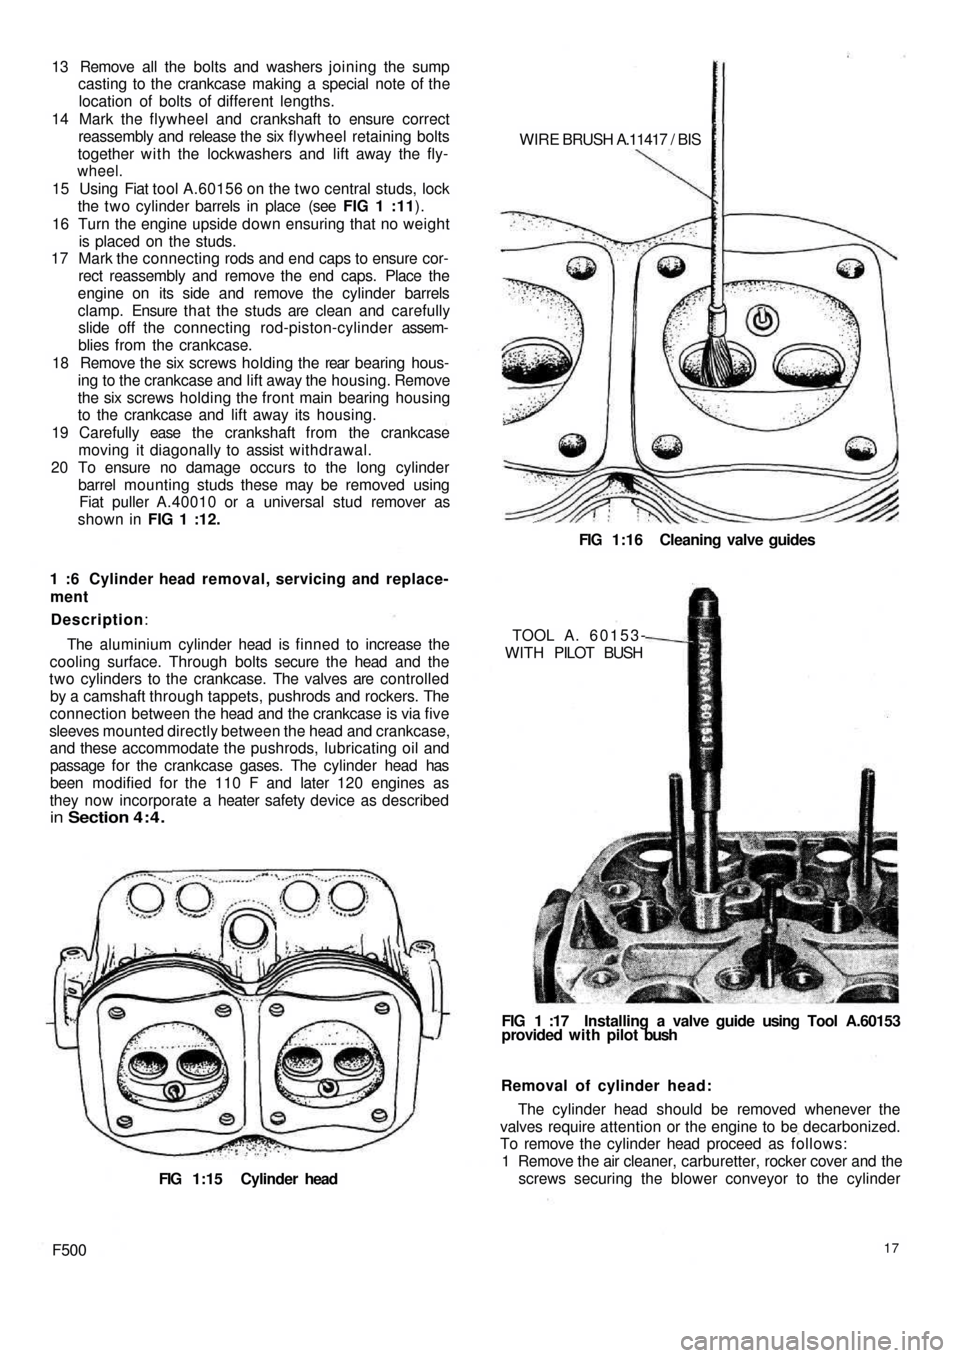 FIAT 500 1964 1.G Workshop Manual 13  Remove all the bolts and washers joining the sump
casting to the crankcase making a special note of the
location of bolts of different lengths.
14 Mark the flywheel and crankshaft to ensure correc